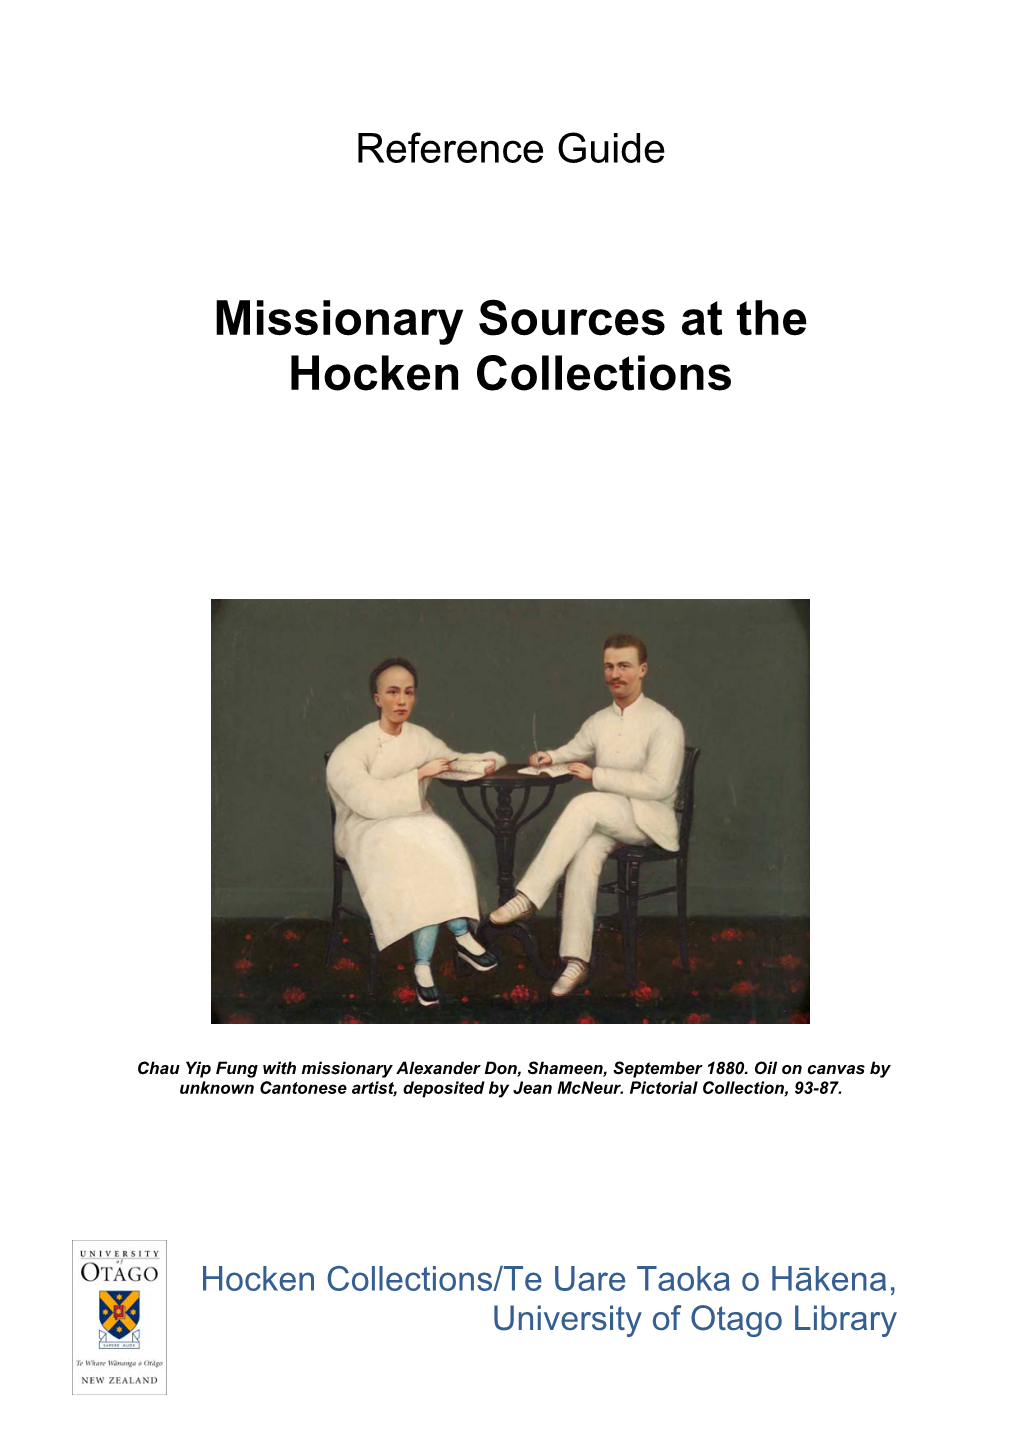 Missionary Sources at the Hocken Collections